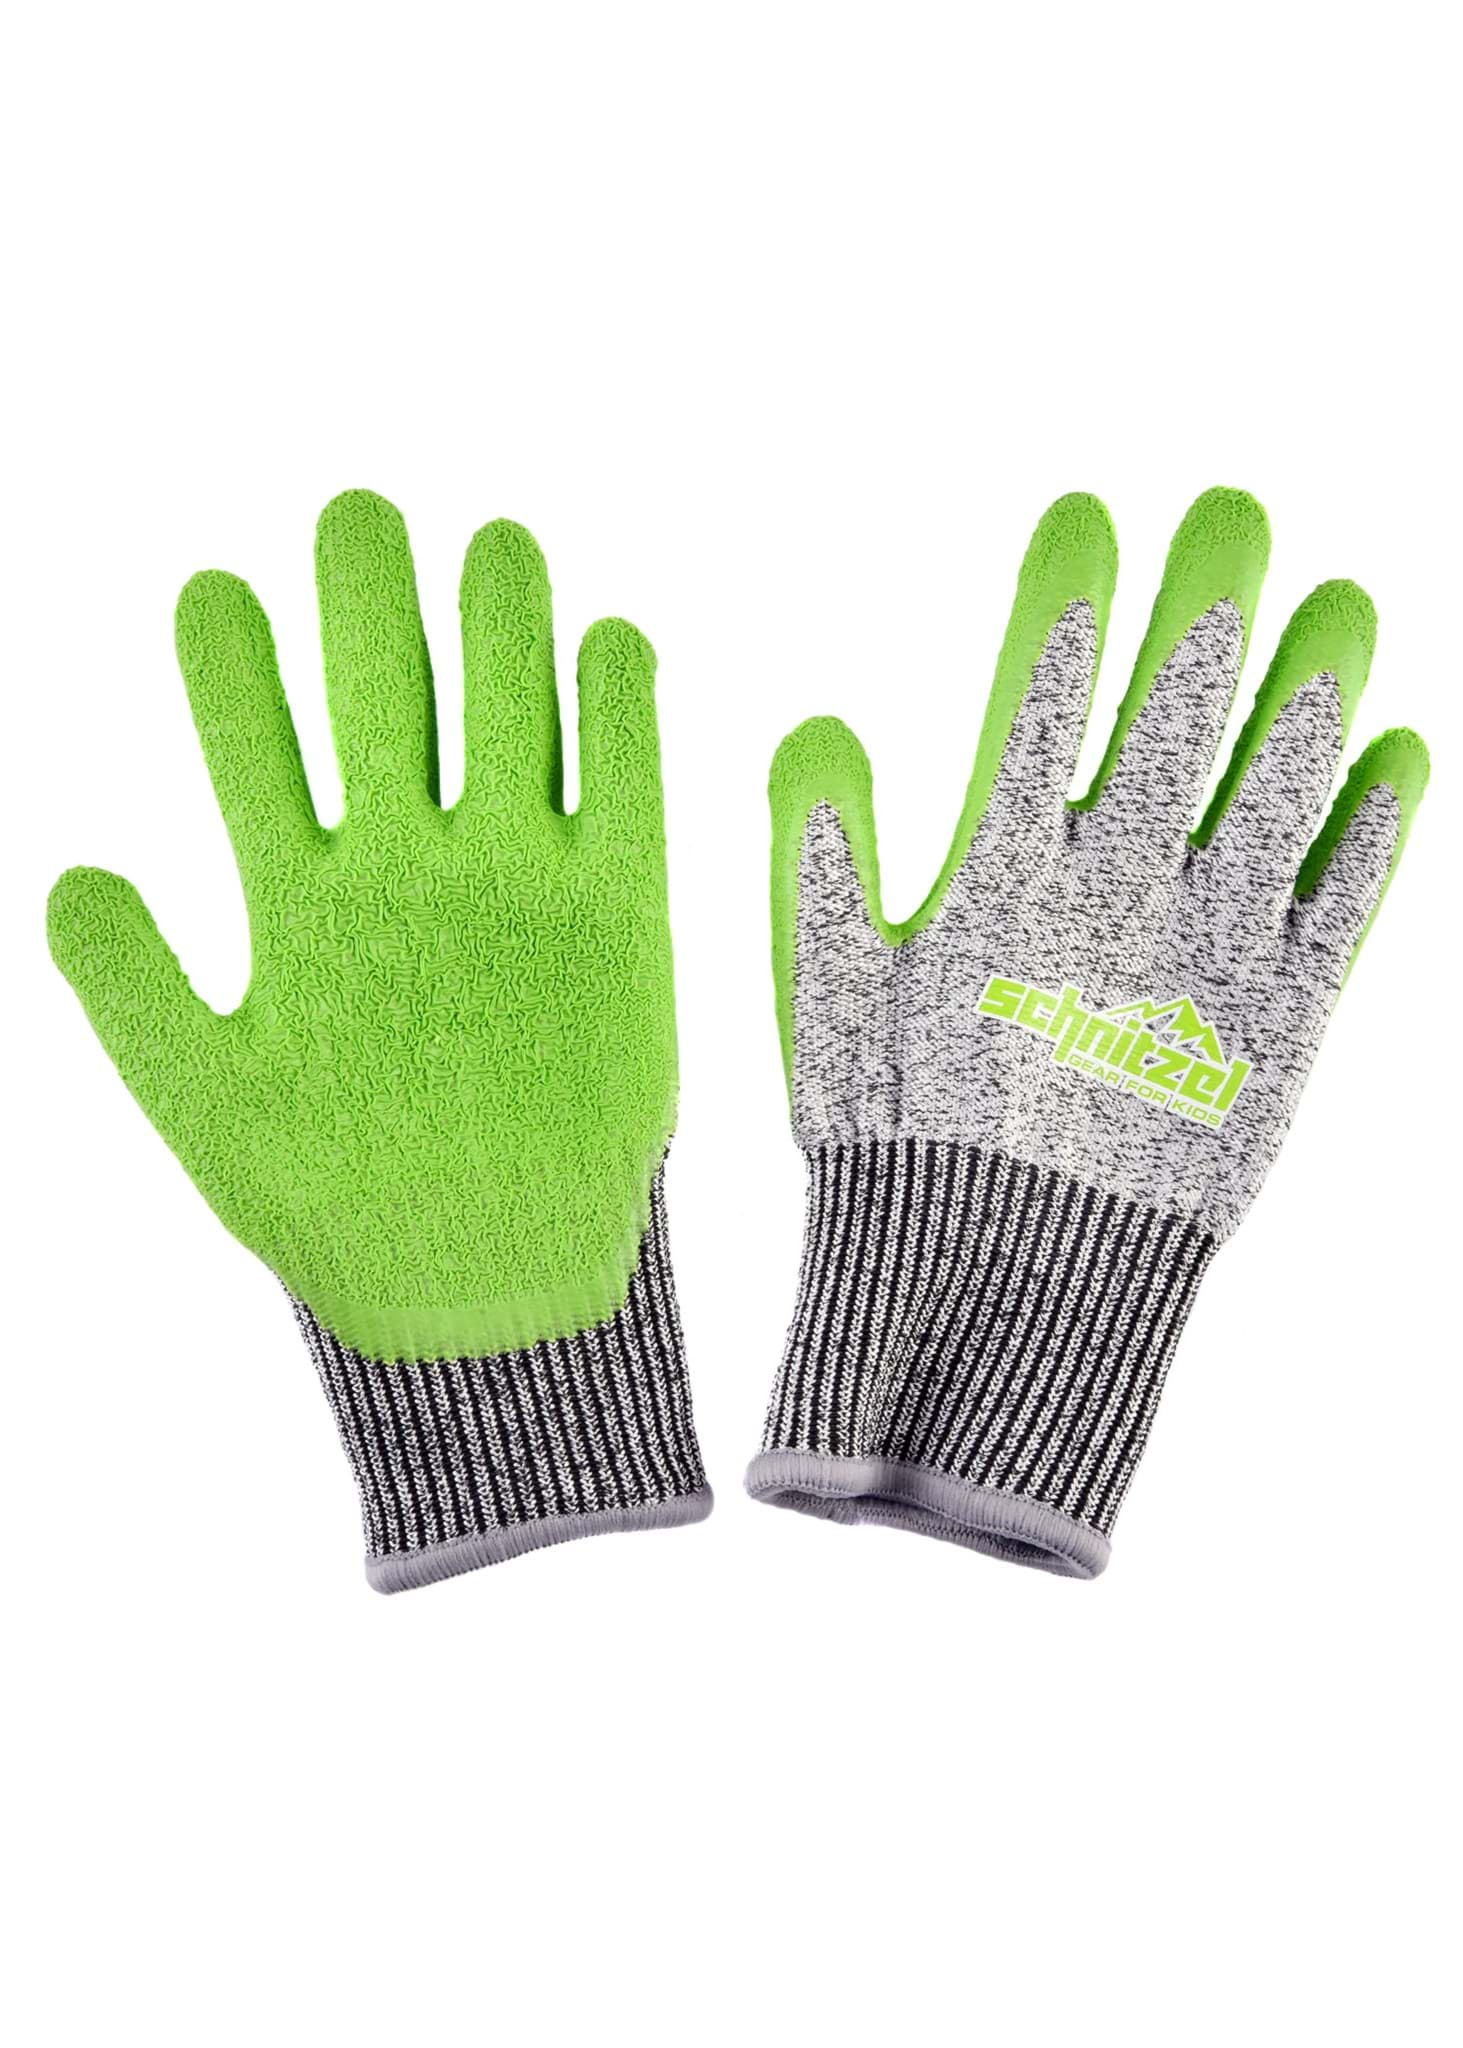 Picture of Schnitzel - Protekto Cut Protection Gloves for Kids Size 3